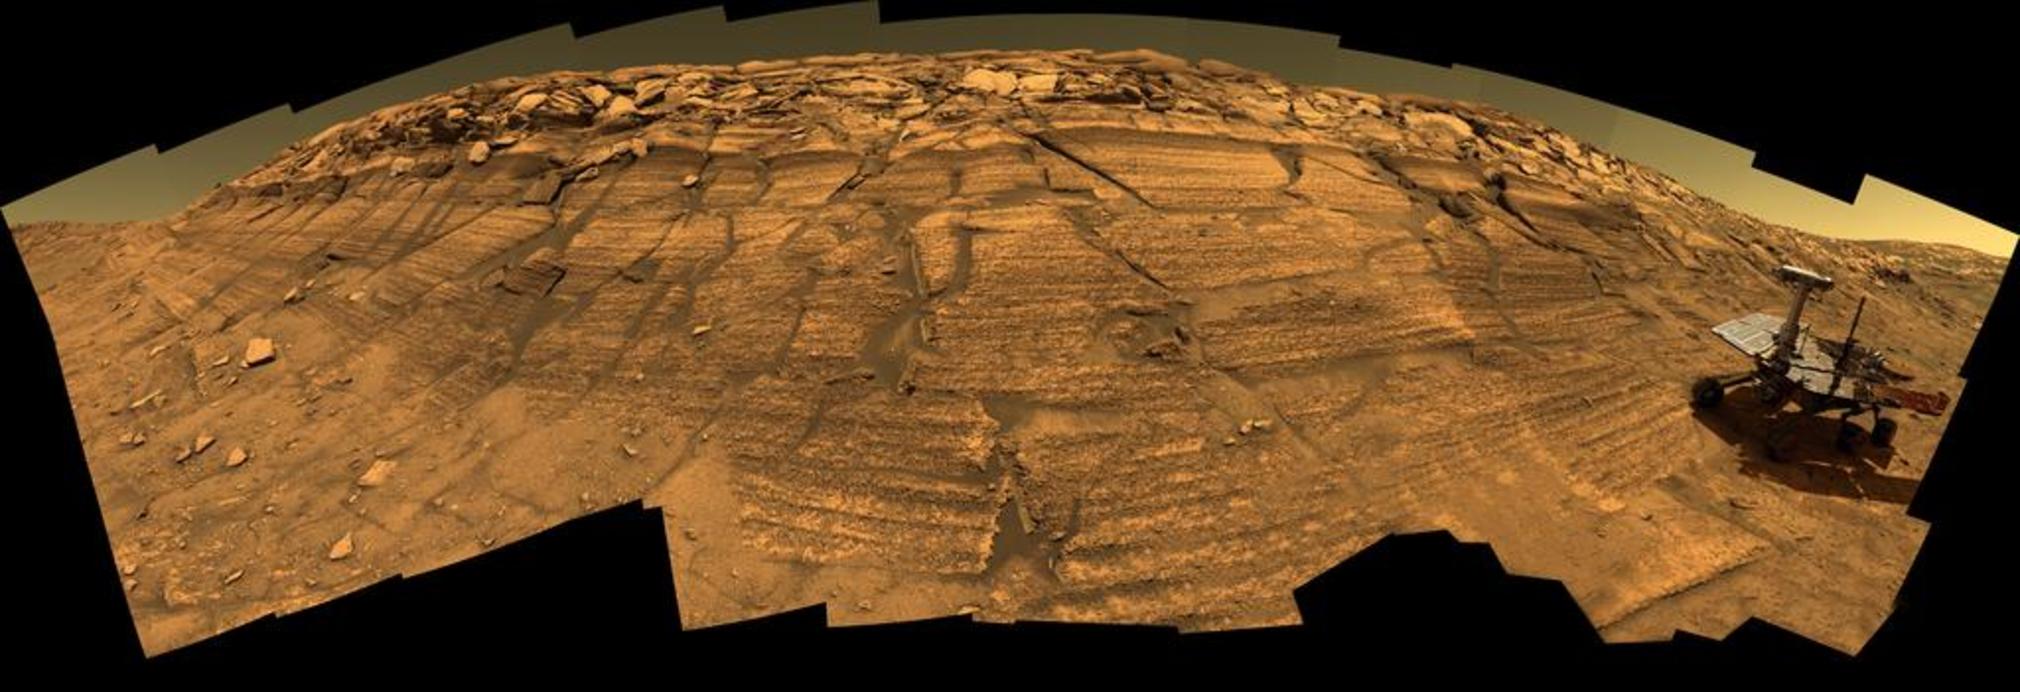 Simulated image of Opportunity on ‘Burns Cliff’, Mars. Image: NASA.